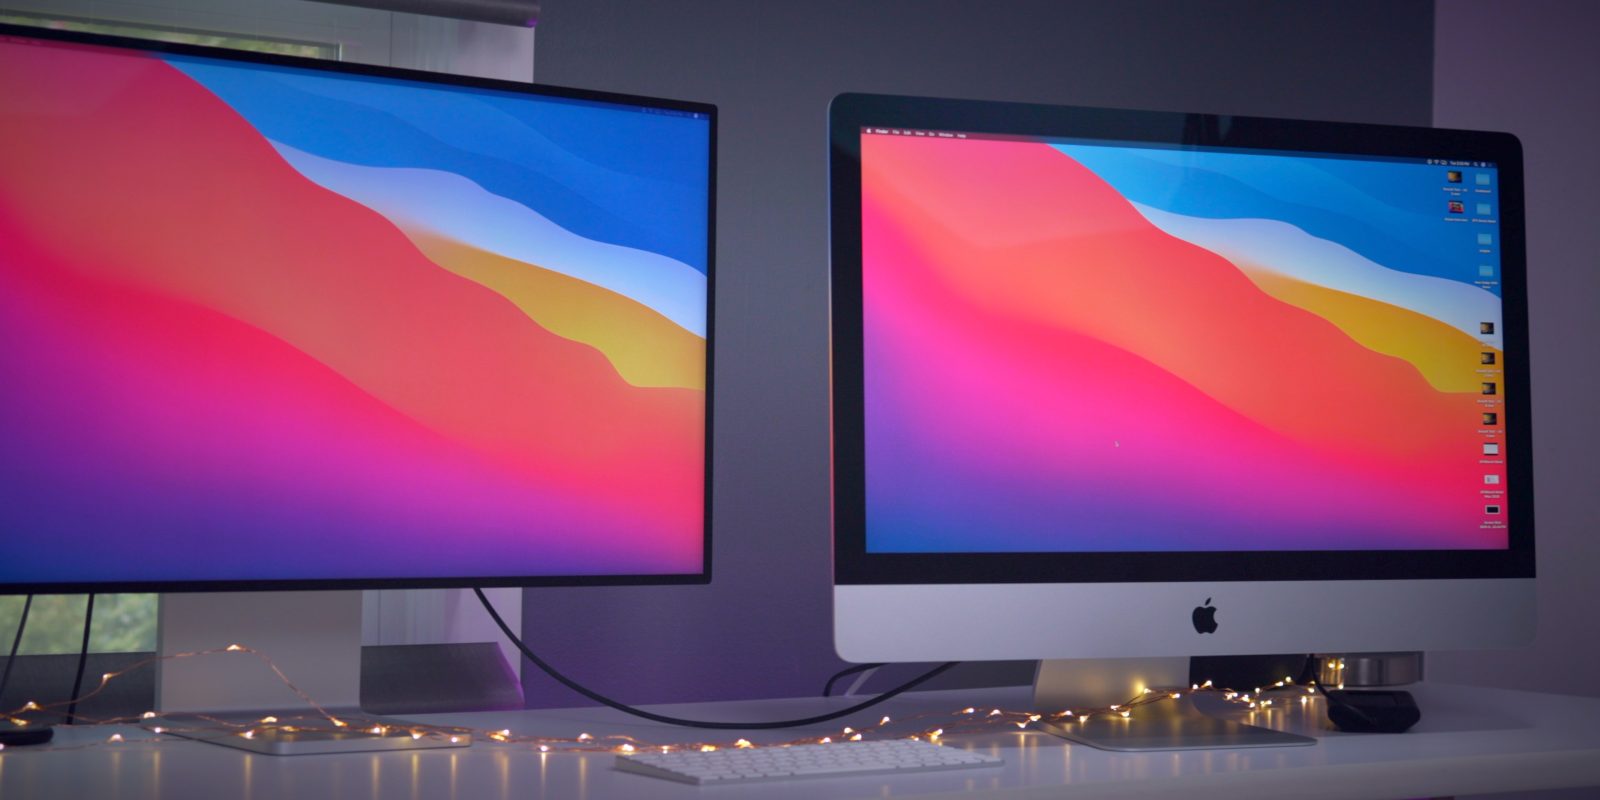 Bloomberg: New iMac with Pro Display XDR design coming ...